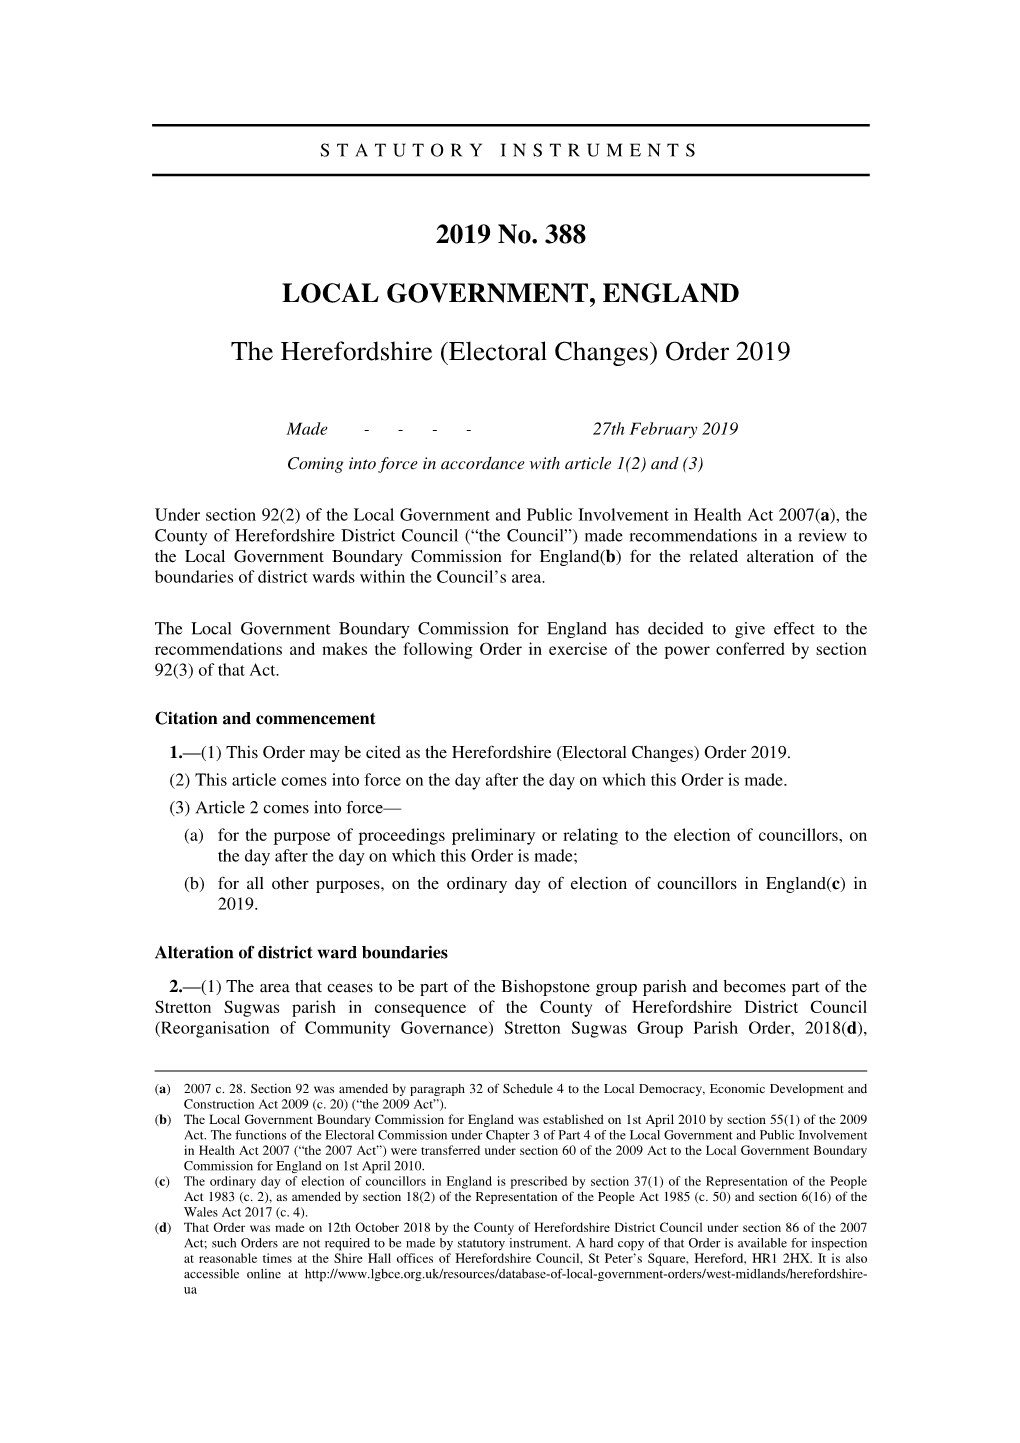 The Herefordshire (Electoral Changes) Order 2019